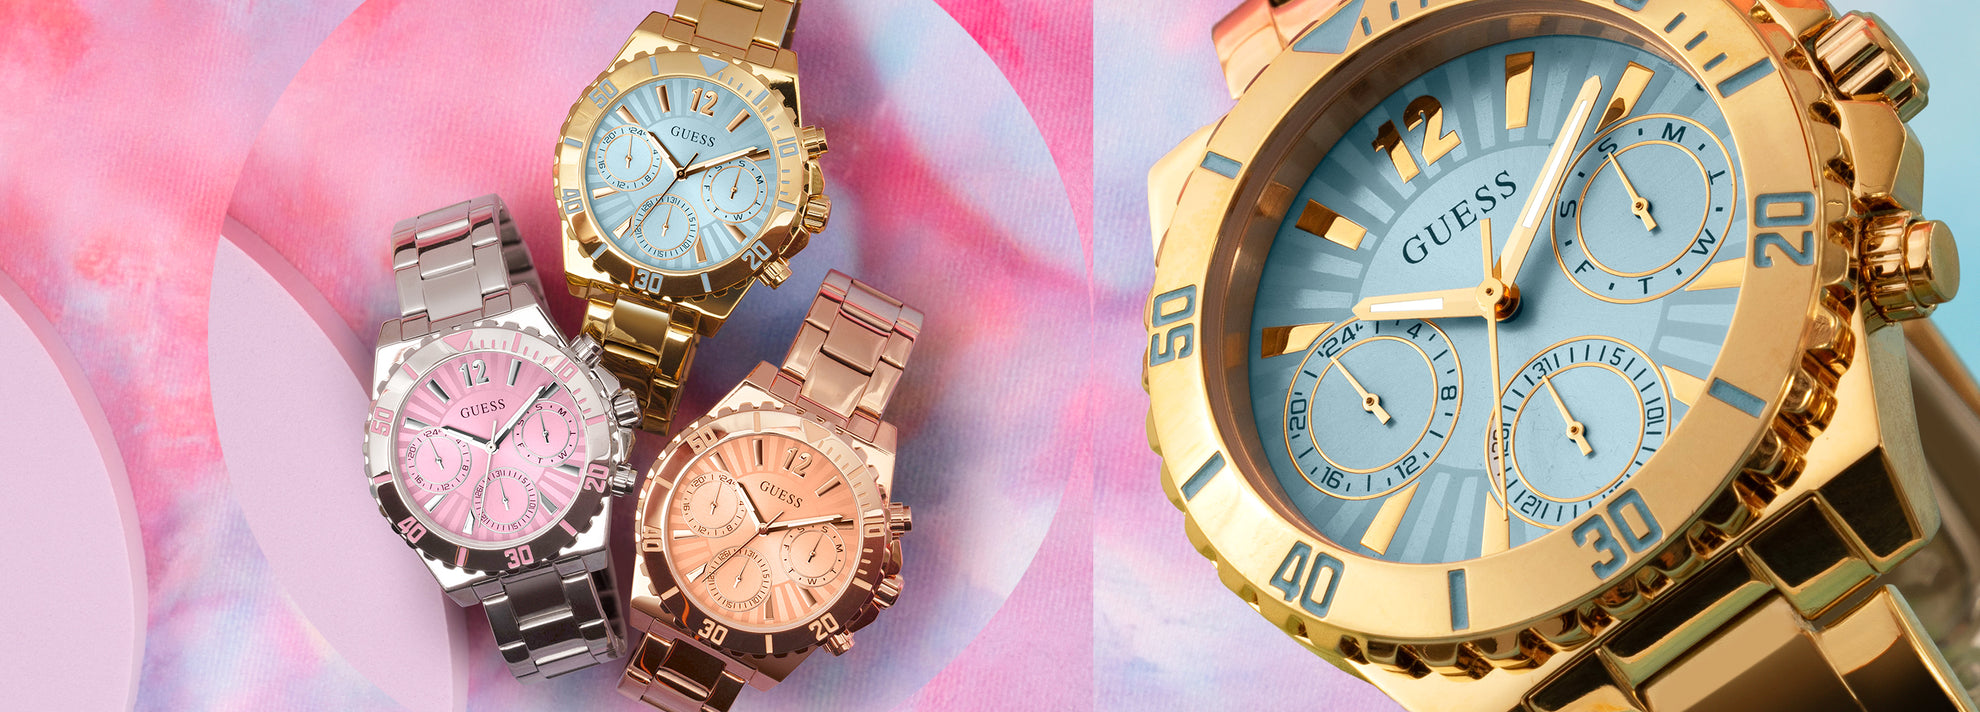 silver, gold and rose gold watches with colored dials on colored background